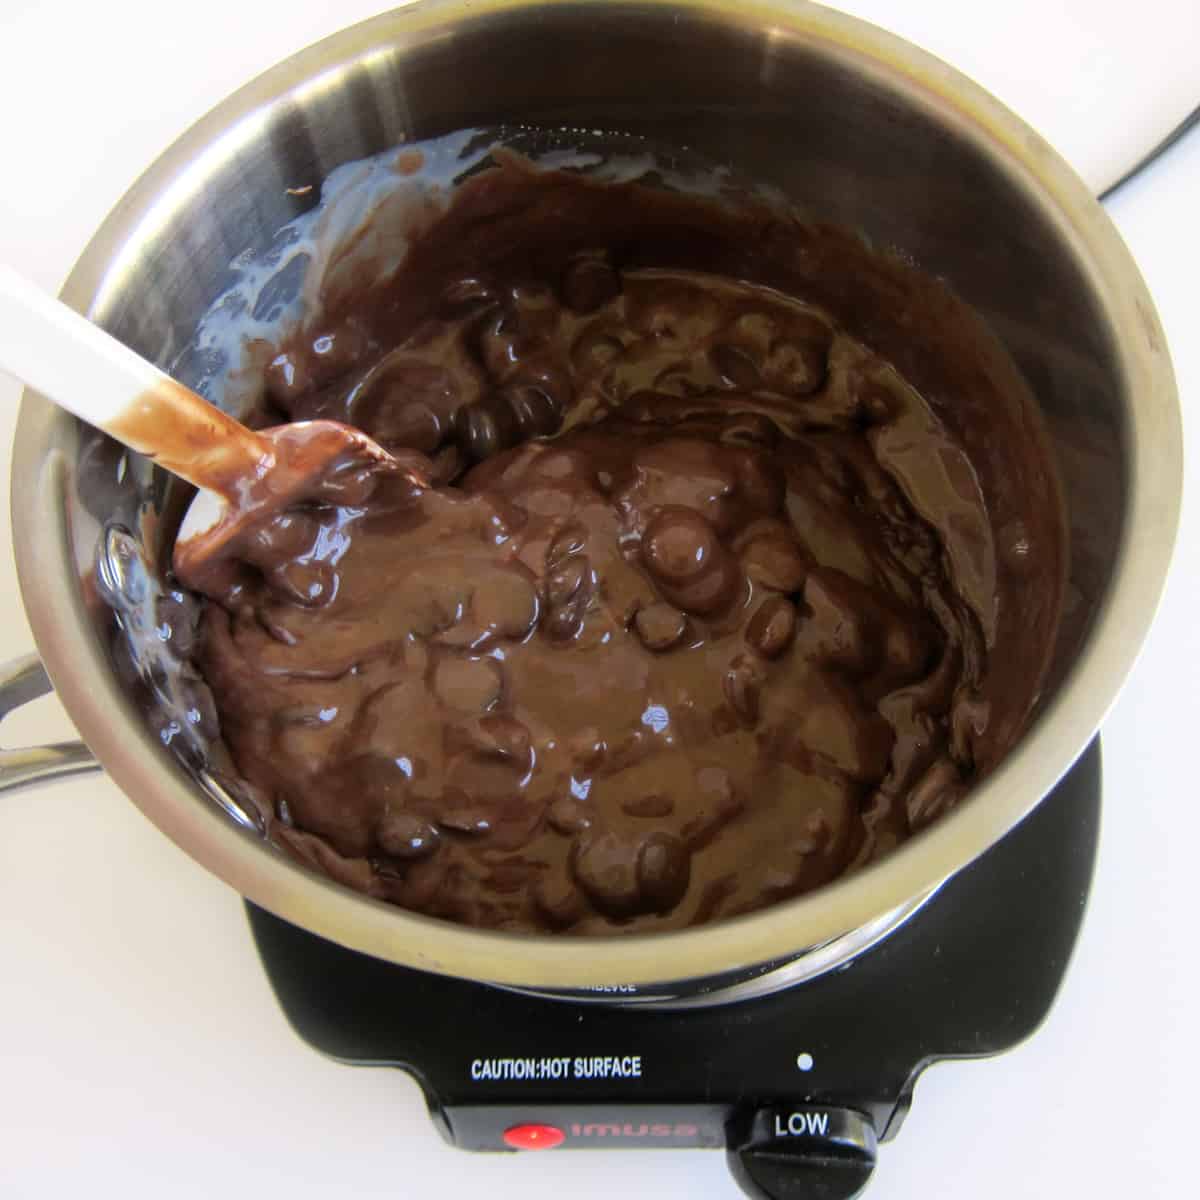 melting chocolate chips and sweetened condensed milk in saucepan on a hot plate over low heat